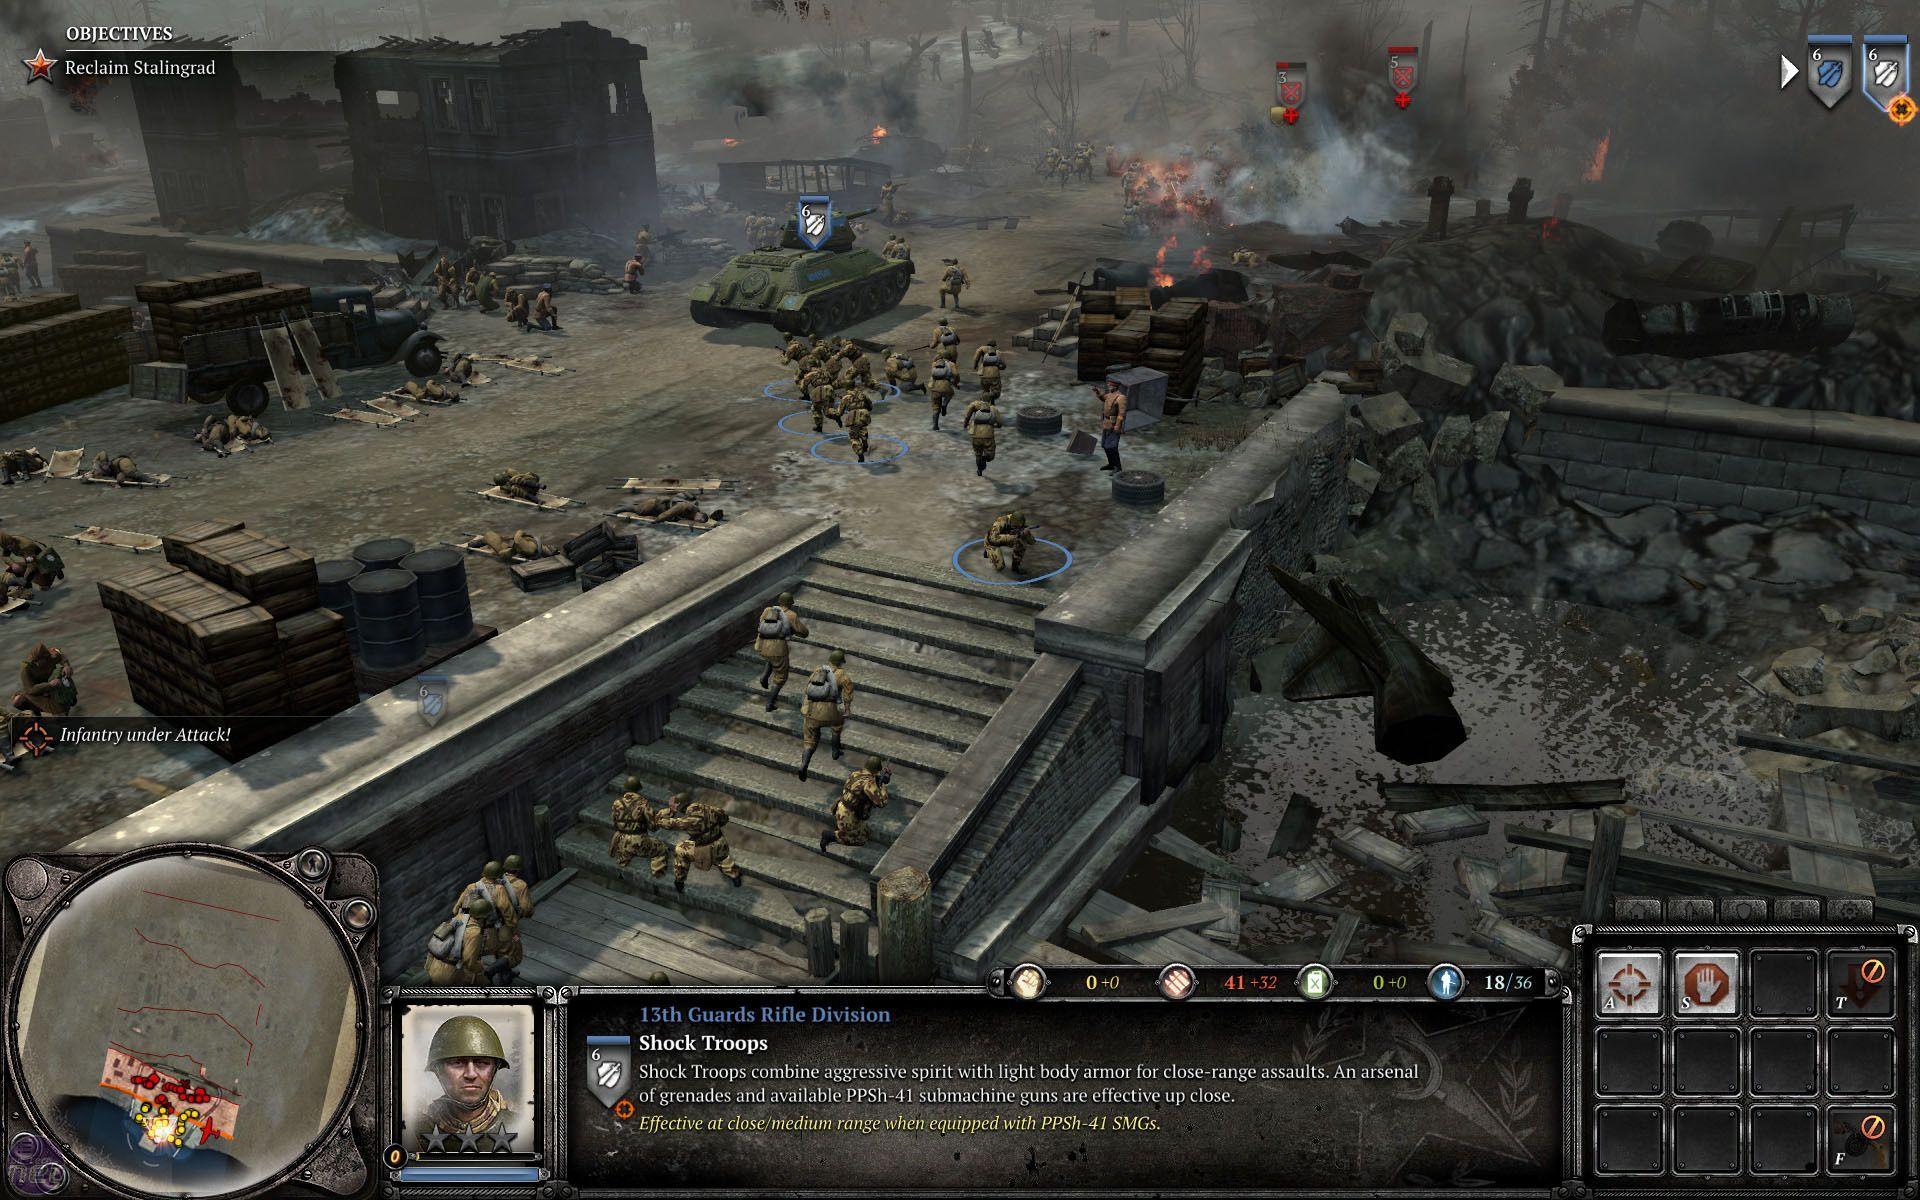 hd company of heroes 2 backgrounds